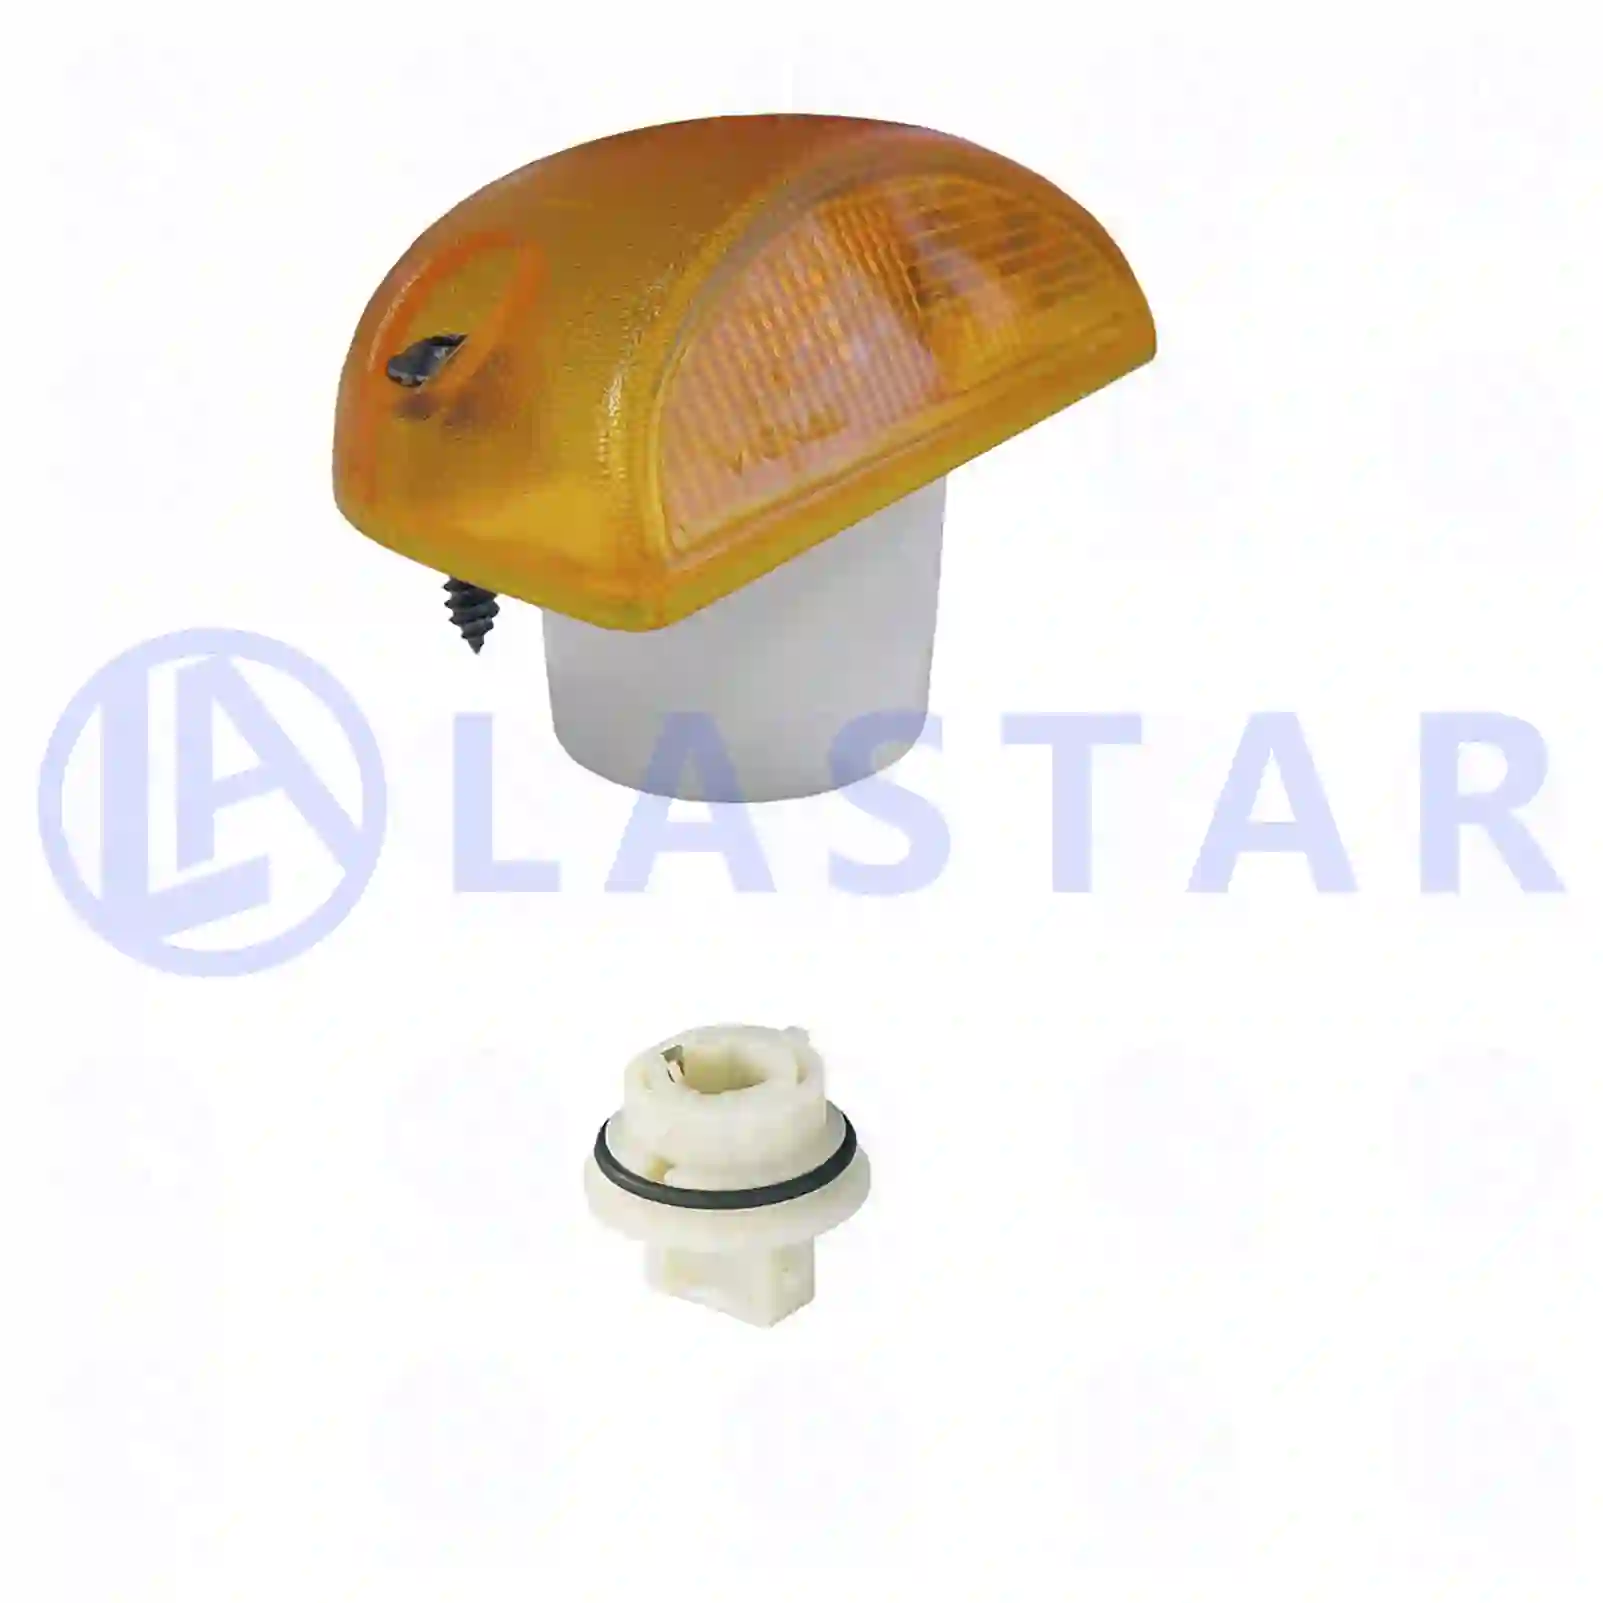 Turn signal lamp, with lamp socket, without bulb, 77712541, 1404747, 1626101, 5001020257, 97163920, 82253206005, 82253206007, 20733983, 21371832, ZG21247-0008 ||  77712541 Lastar Spare Part | Truck Spare Parts, Auotomotive Spare Parts Turn signal lamp, with lamp socket, without bulb, 77712541, 1404747, 1626101, 5001020257, 97163920, 82253206005, 82253206007, 20733983, 21371832, ZG21247-0008 ||  77712541 Lastar Spare Part | Truck Spare Parts, Auotomotive Spare Parts